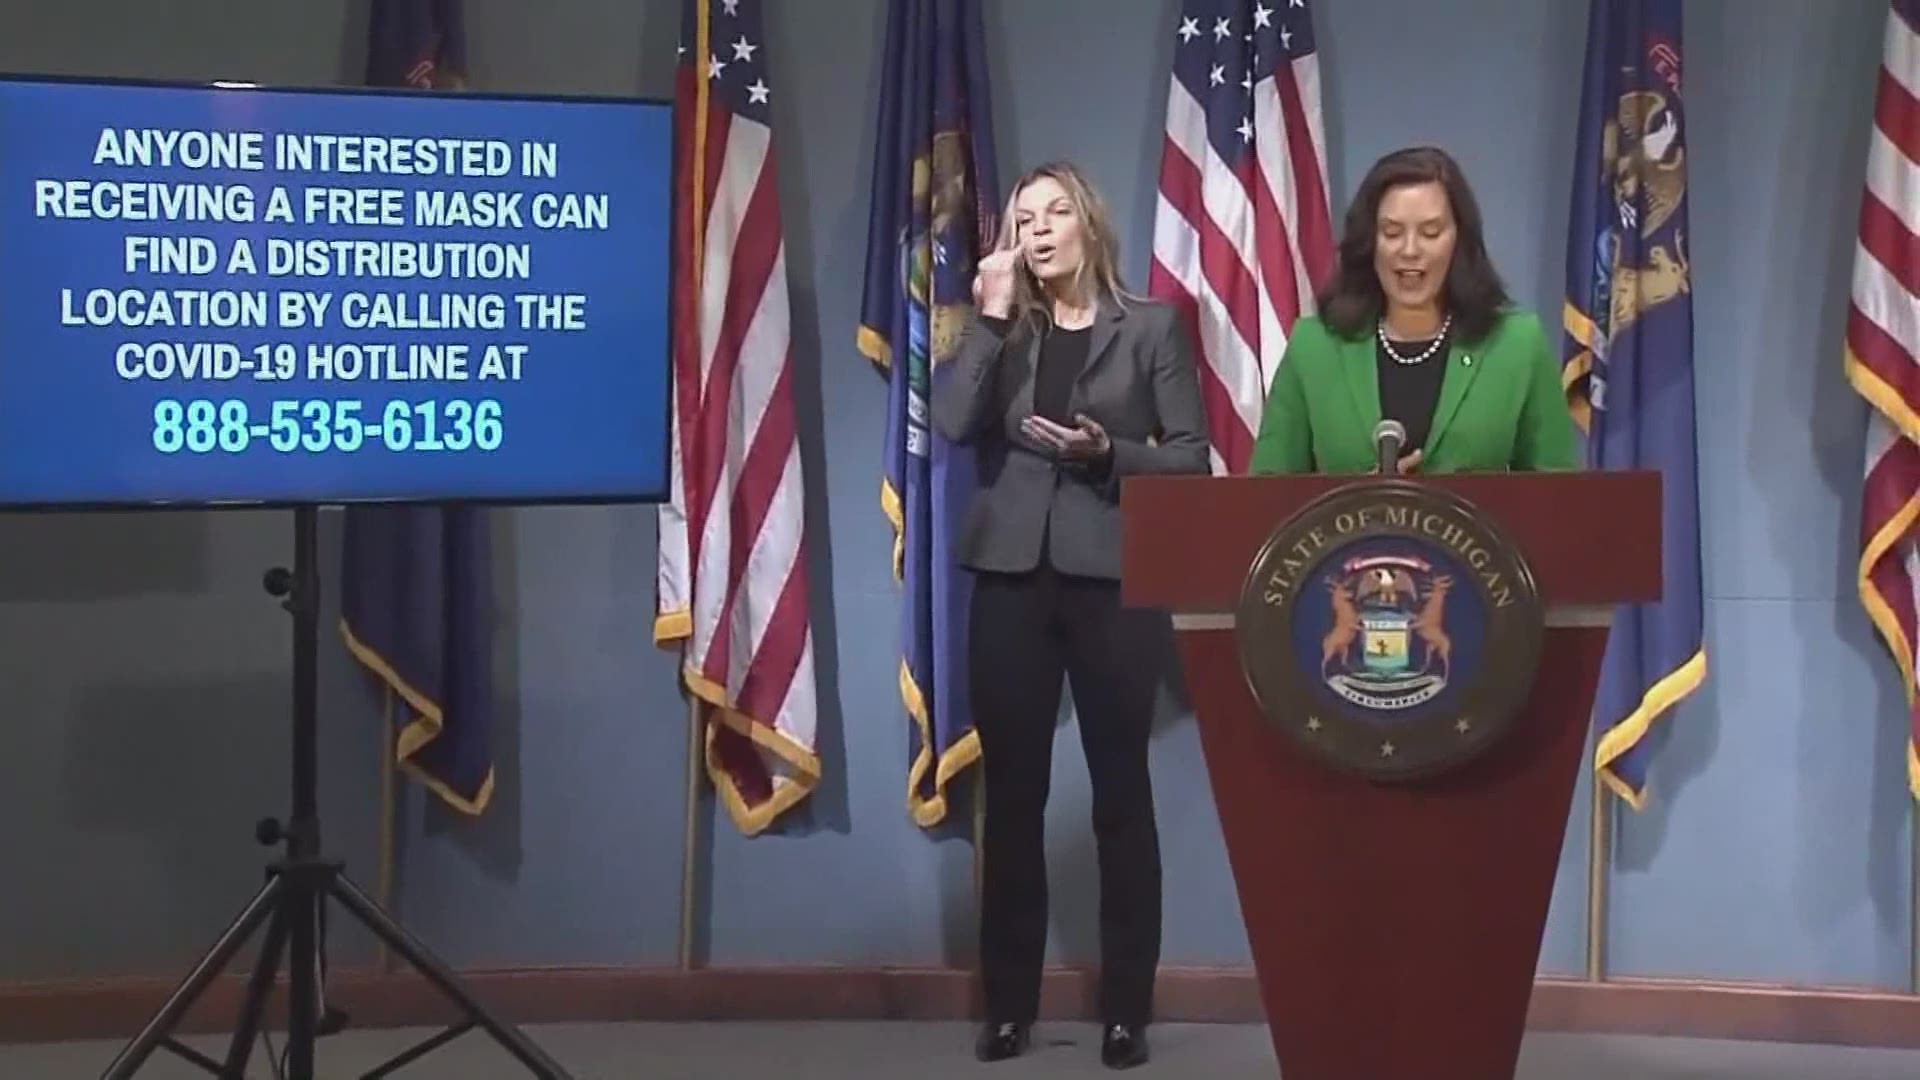 Michigan Department of Health and Human Services, Ford, and FEMA have partnered together to provide the masks.